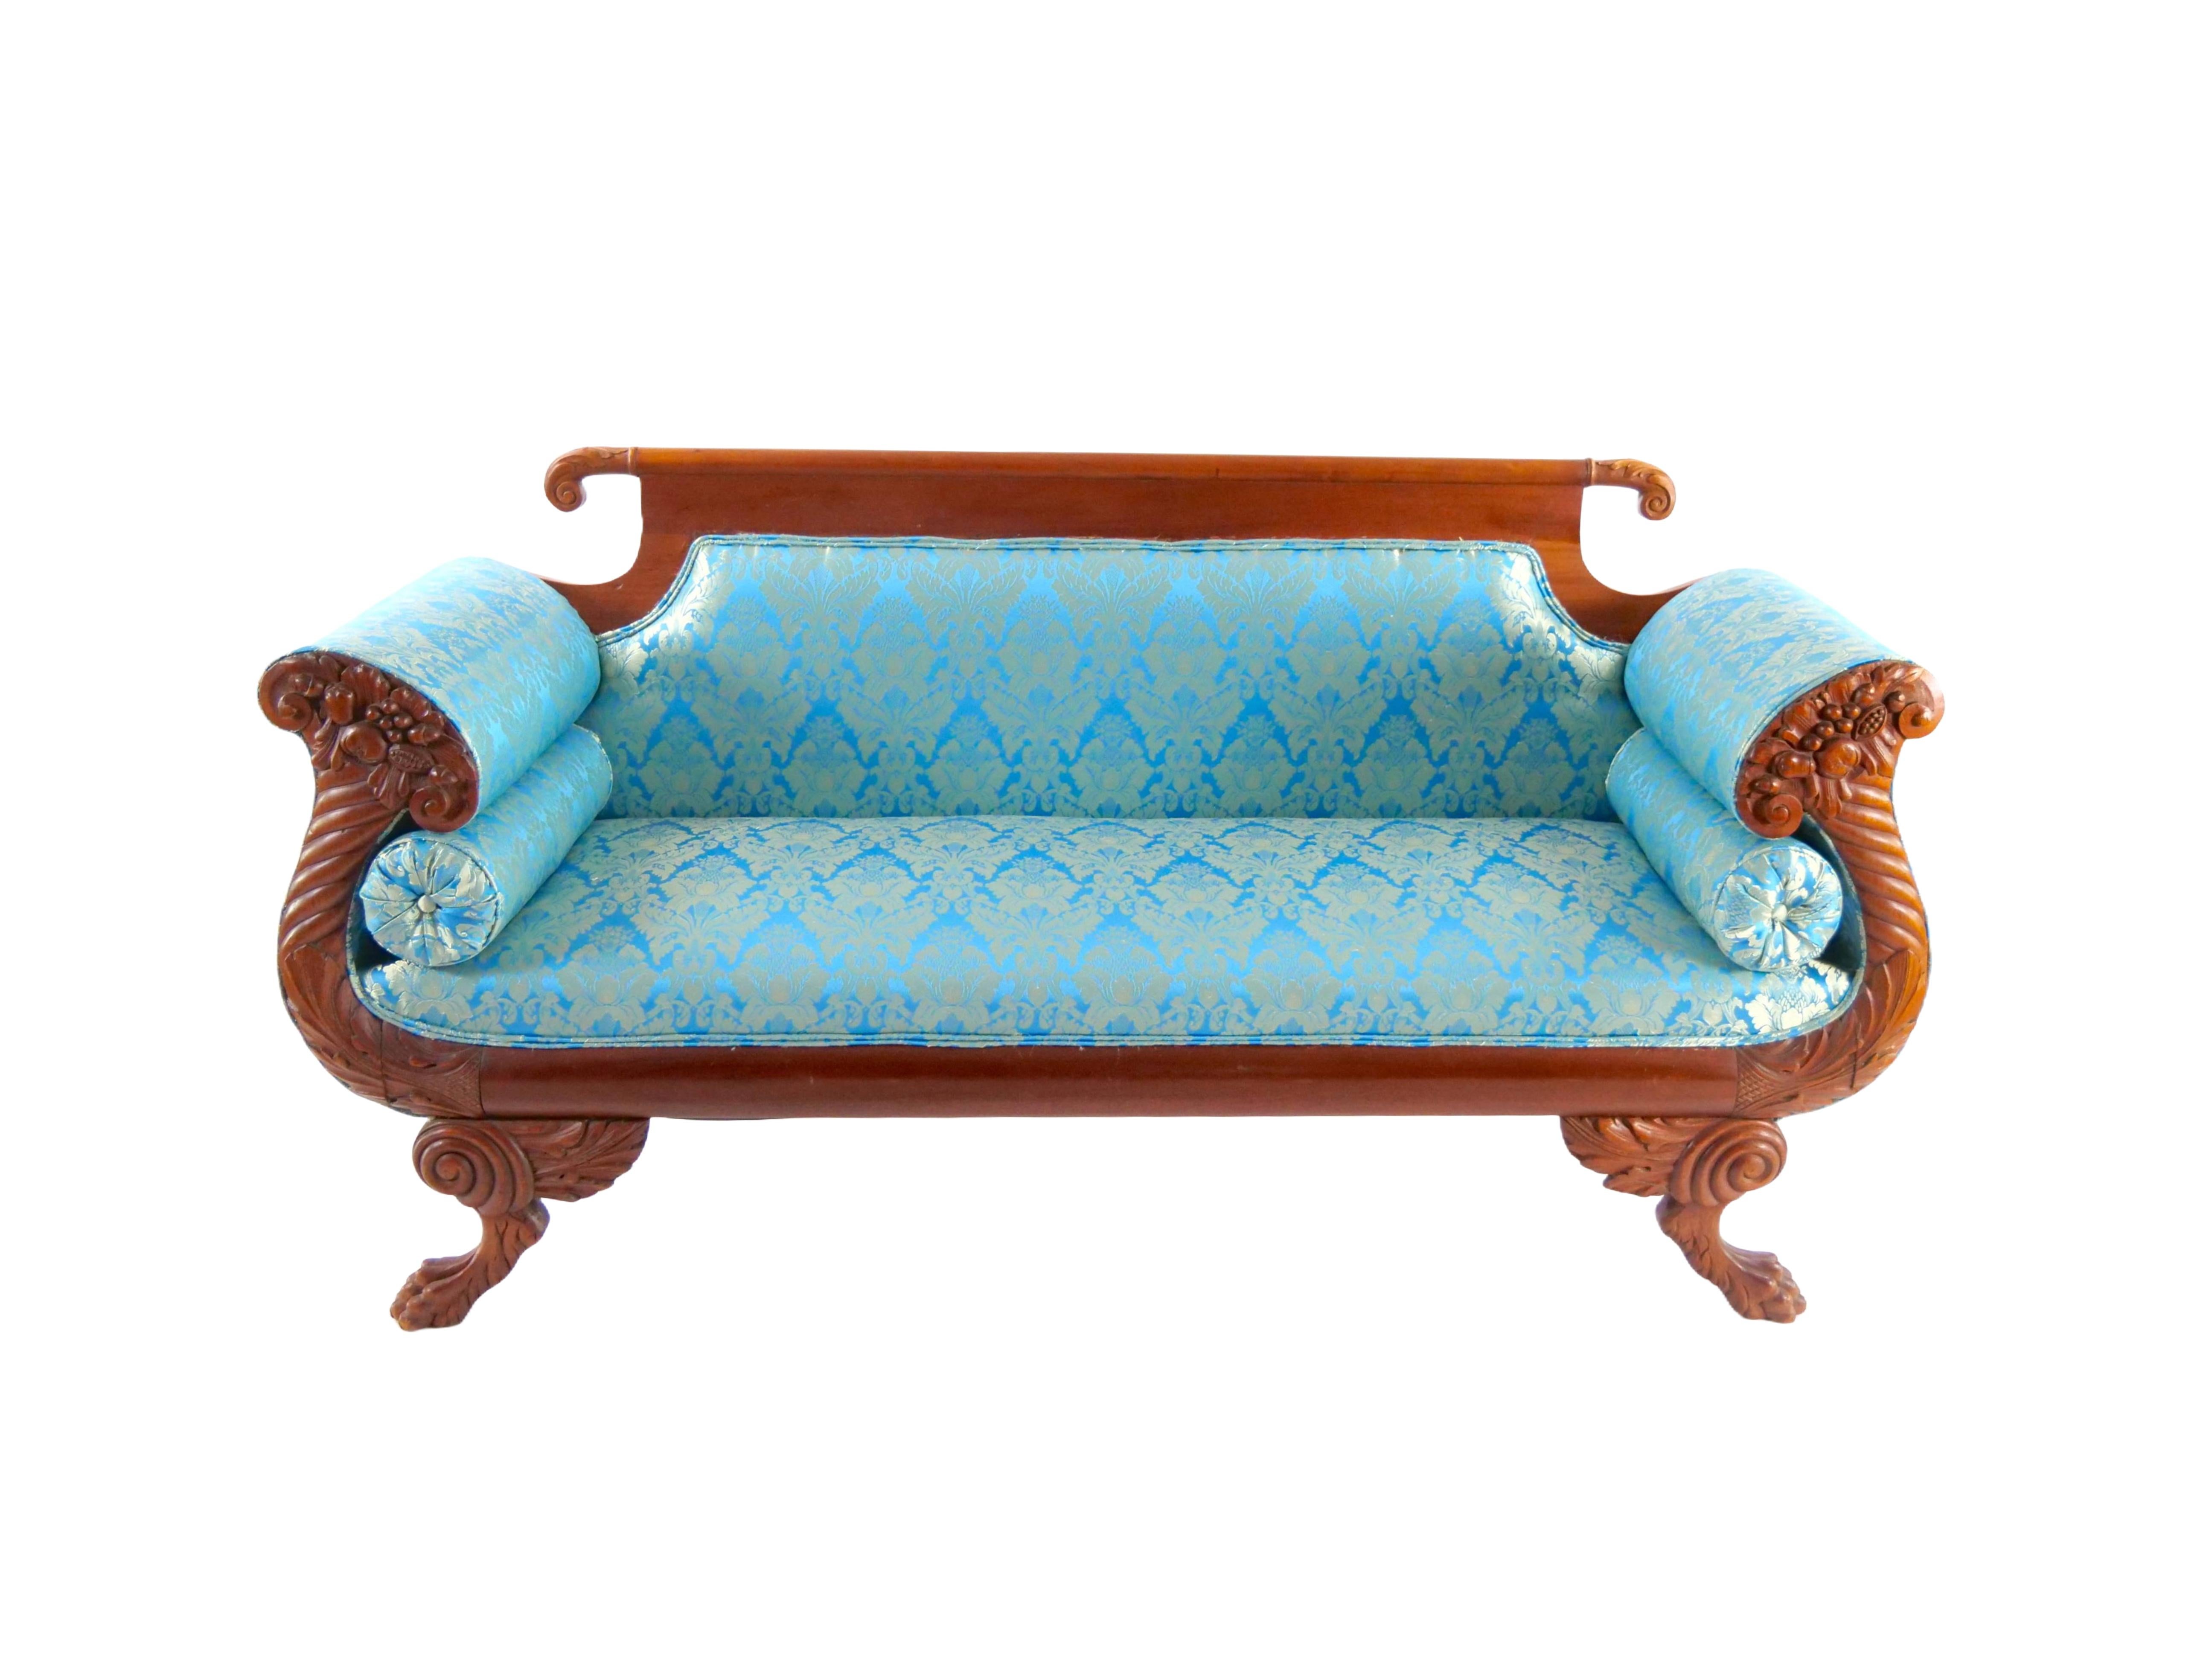 19th Century Mahogany Wood Framed Empire Style Upholstered Sofa For Sale 4